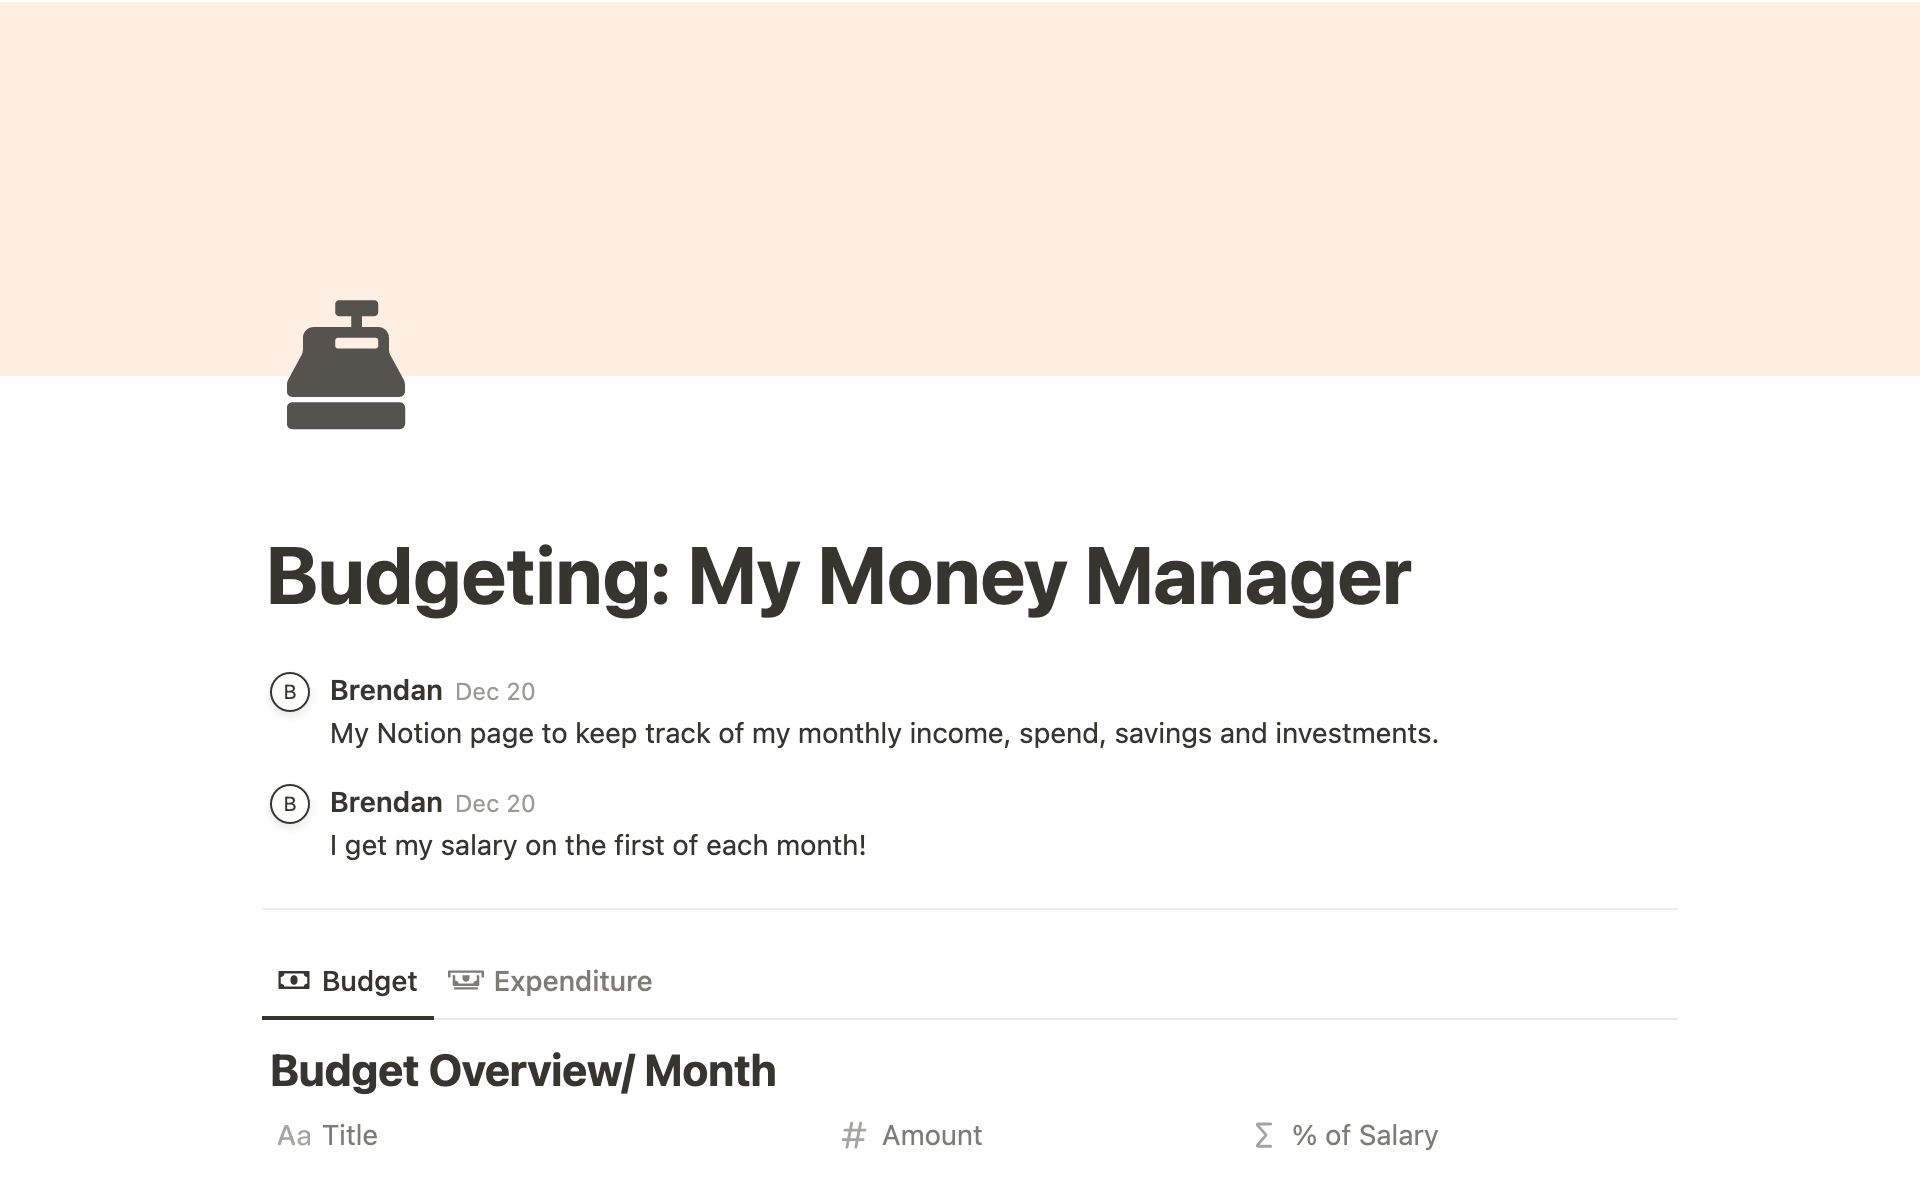 Budgeting tracker for income, spending, savings, and investments.